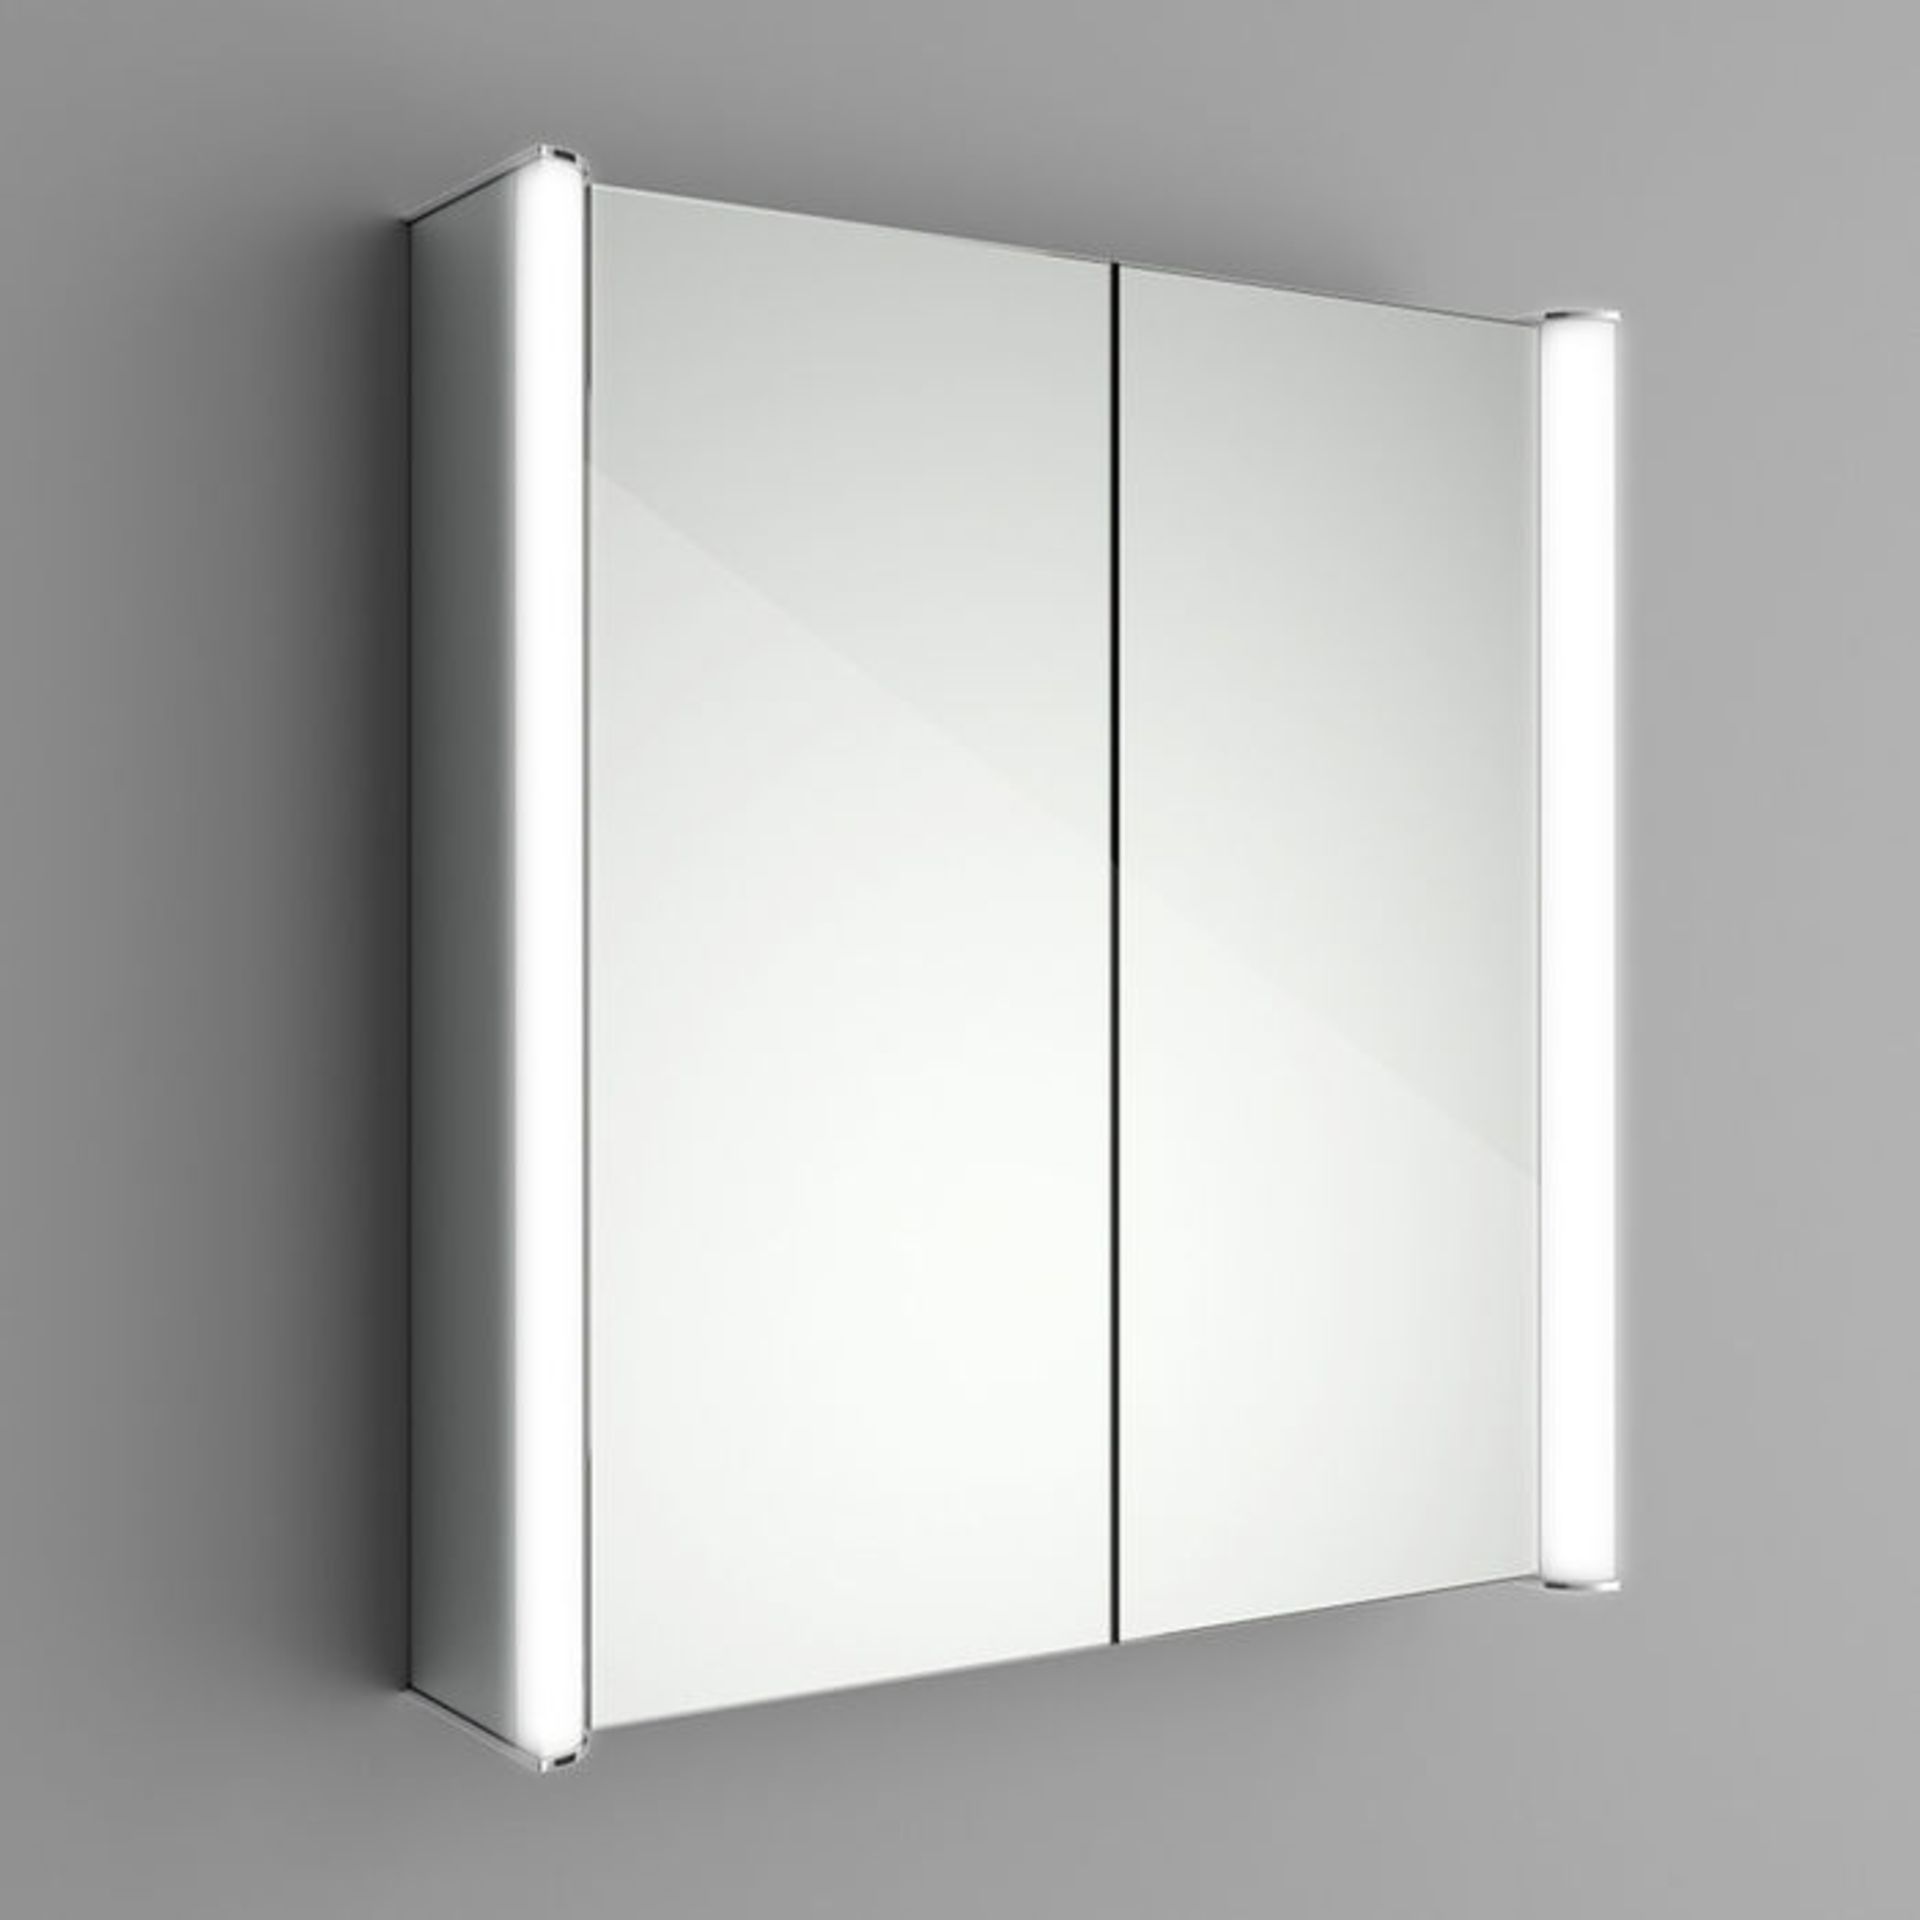 (EY49) 600x650mm Bloom Illuminated LED Mirror Cabinet - Shaver Socket. RRP £399.99. Double Sided - Image 4 of 4